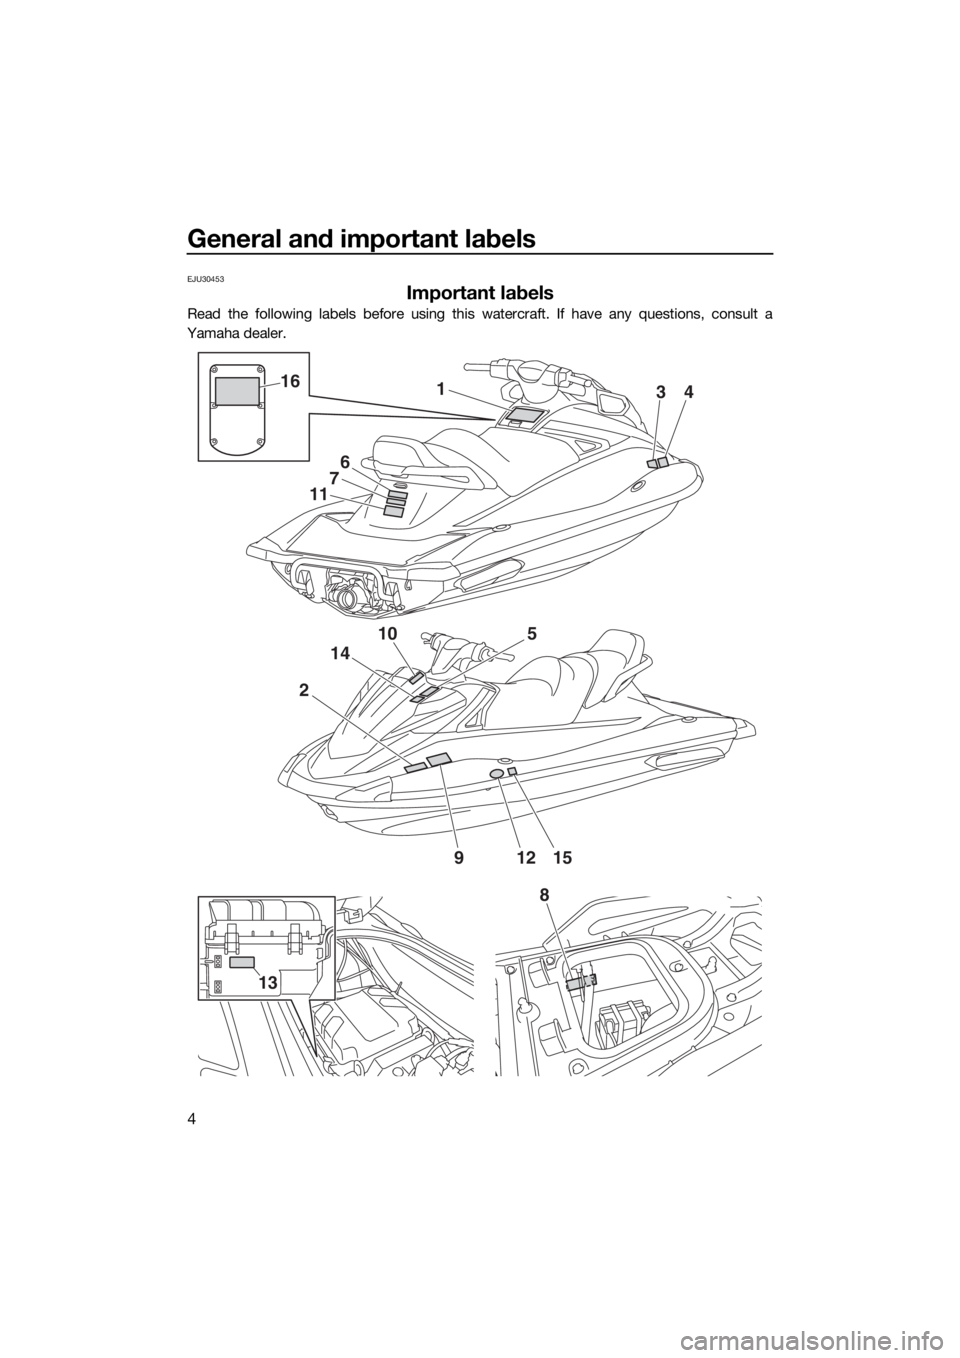 YAMAHA VX 2018  Owners Manual General and important labels
4
EJU30453
Important labels
Read the following labels before using this watercraft. If have any questions, consult a
Yamaha dealer.
2
10
14
1
6
7
11
34
5
91512
16
8
13
UF4